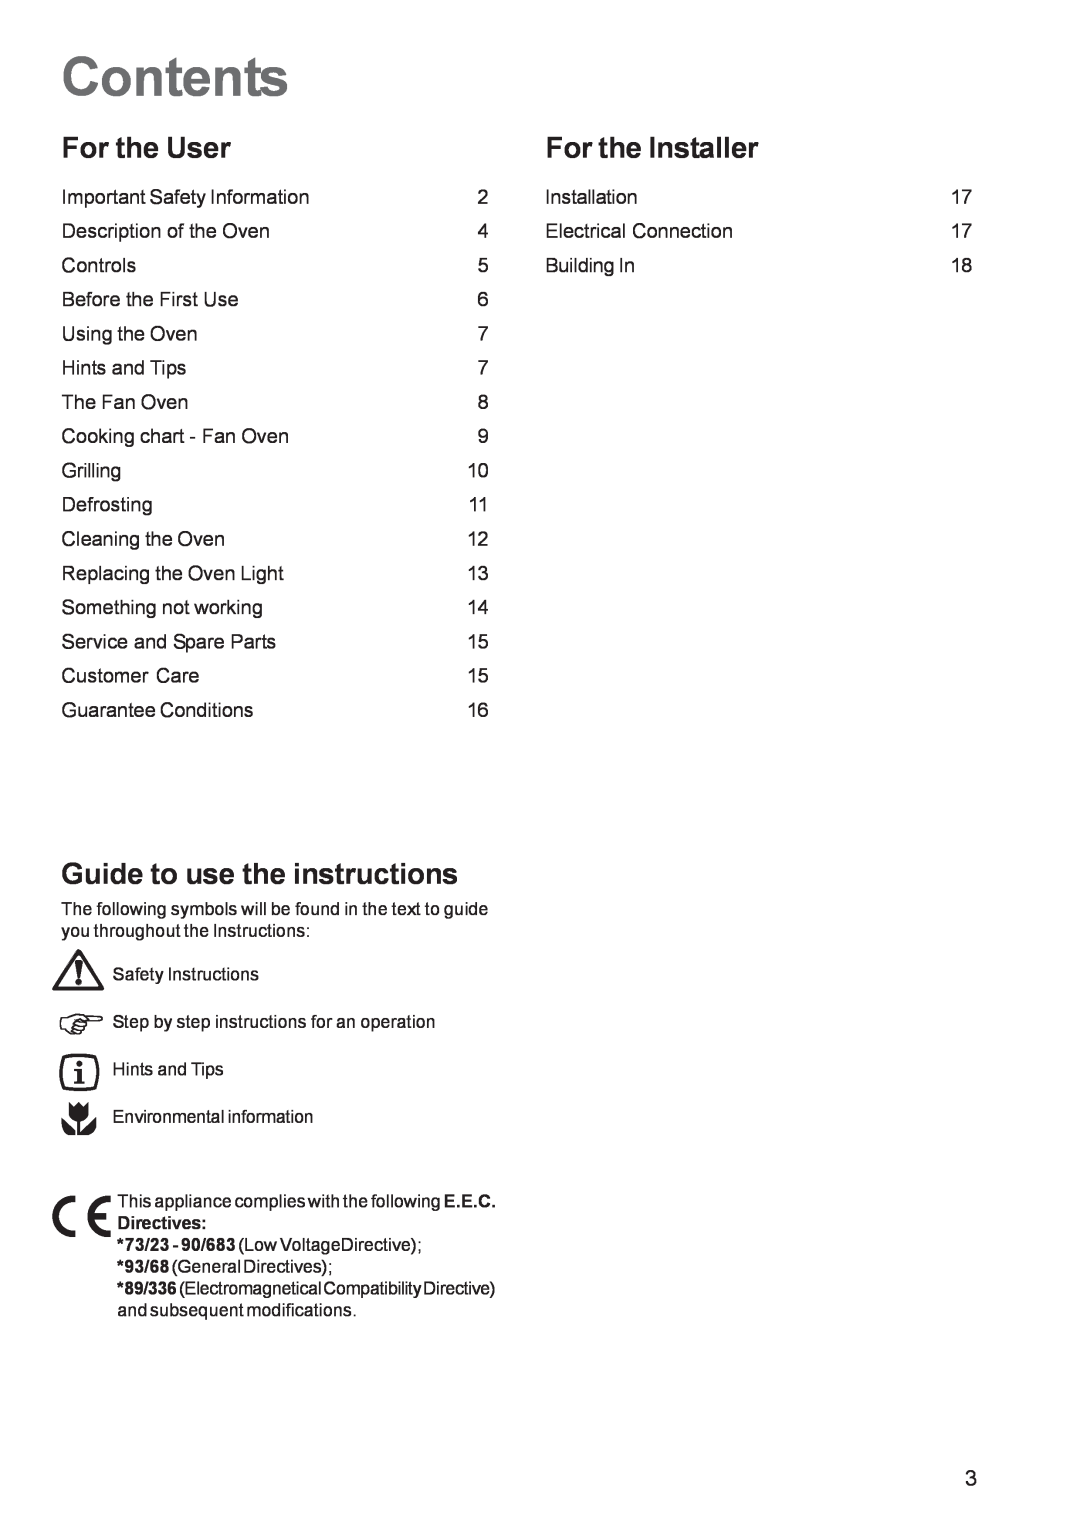 Zanussi ZBF 260 manual Contents, For the User, For the Installer, Guide to use the instructions 